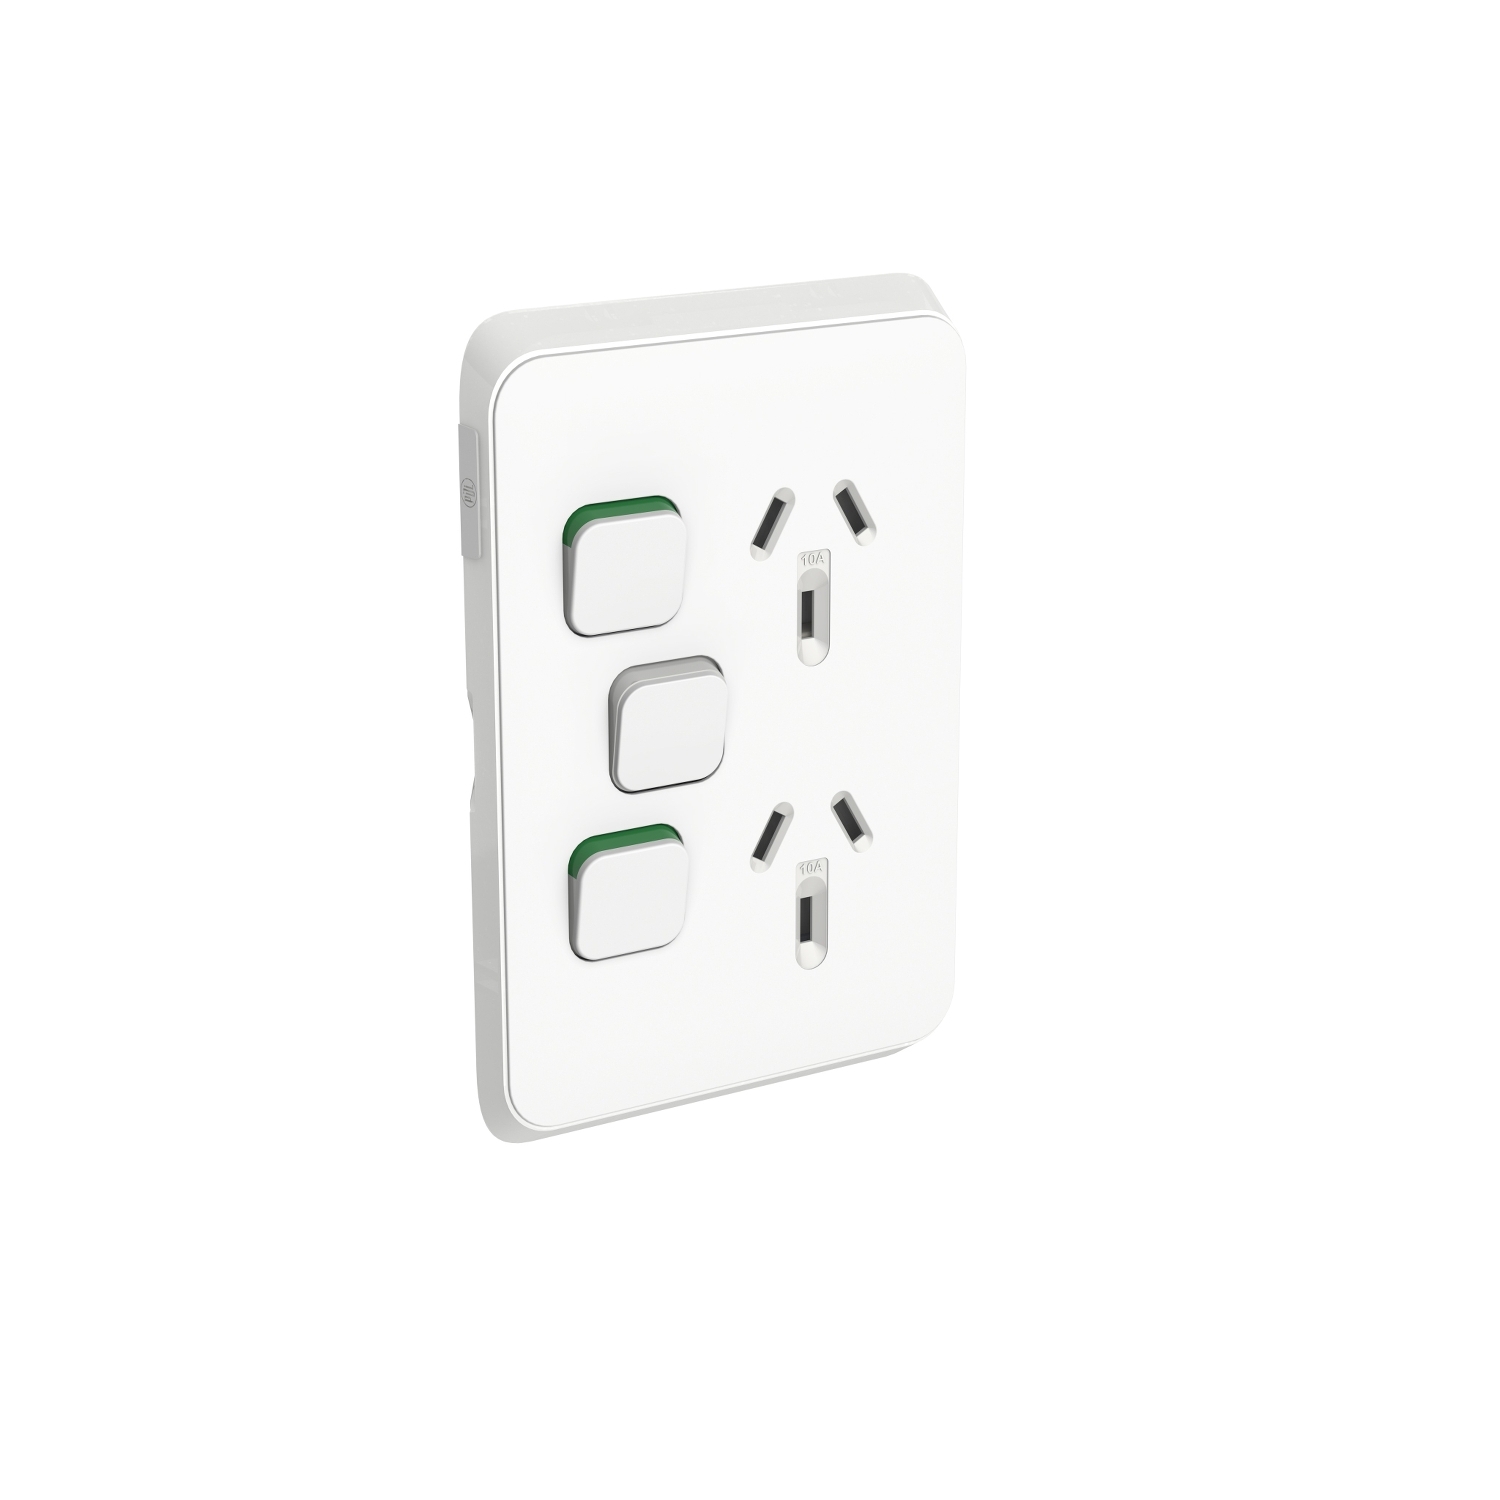 PDL392XC-VW - PDL Iconic Cover Plate Double Switched Socket + Switch Vertical 10Amp - Vivid White